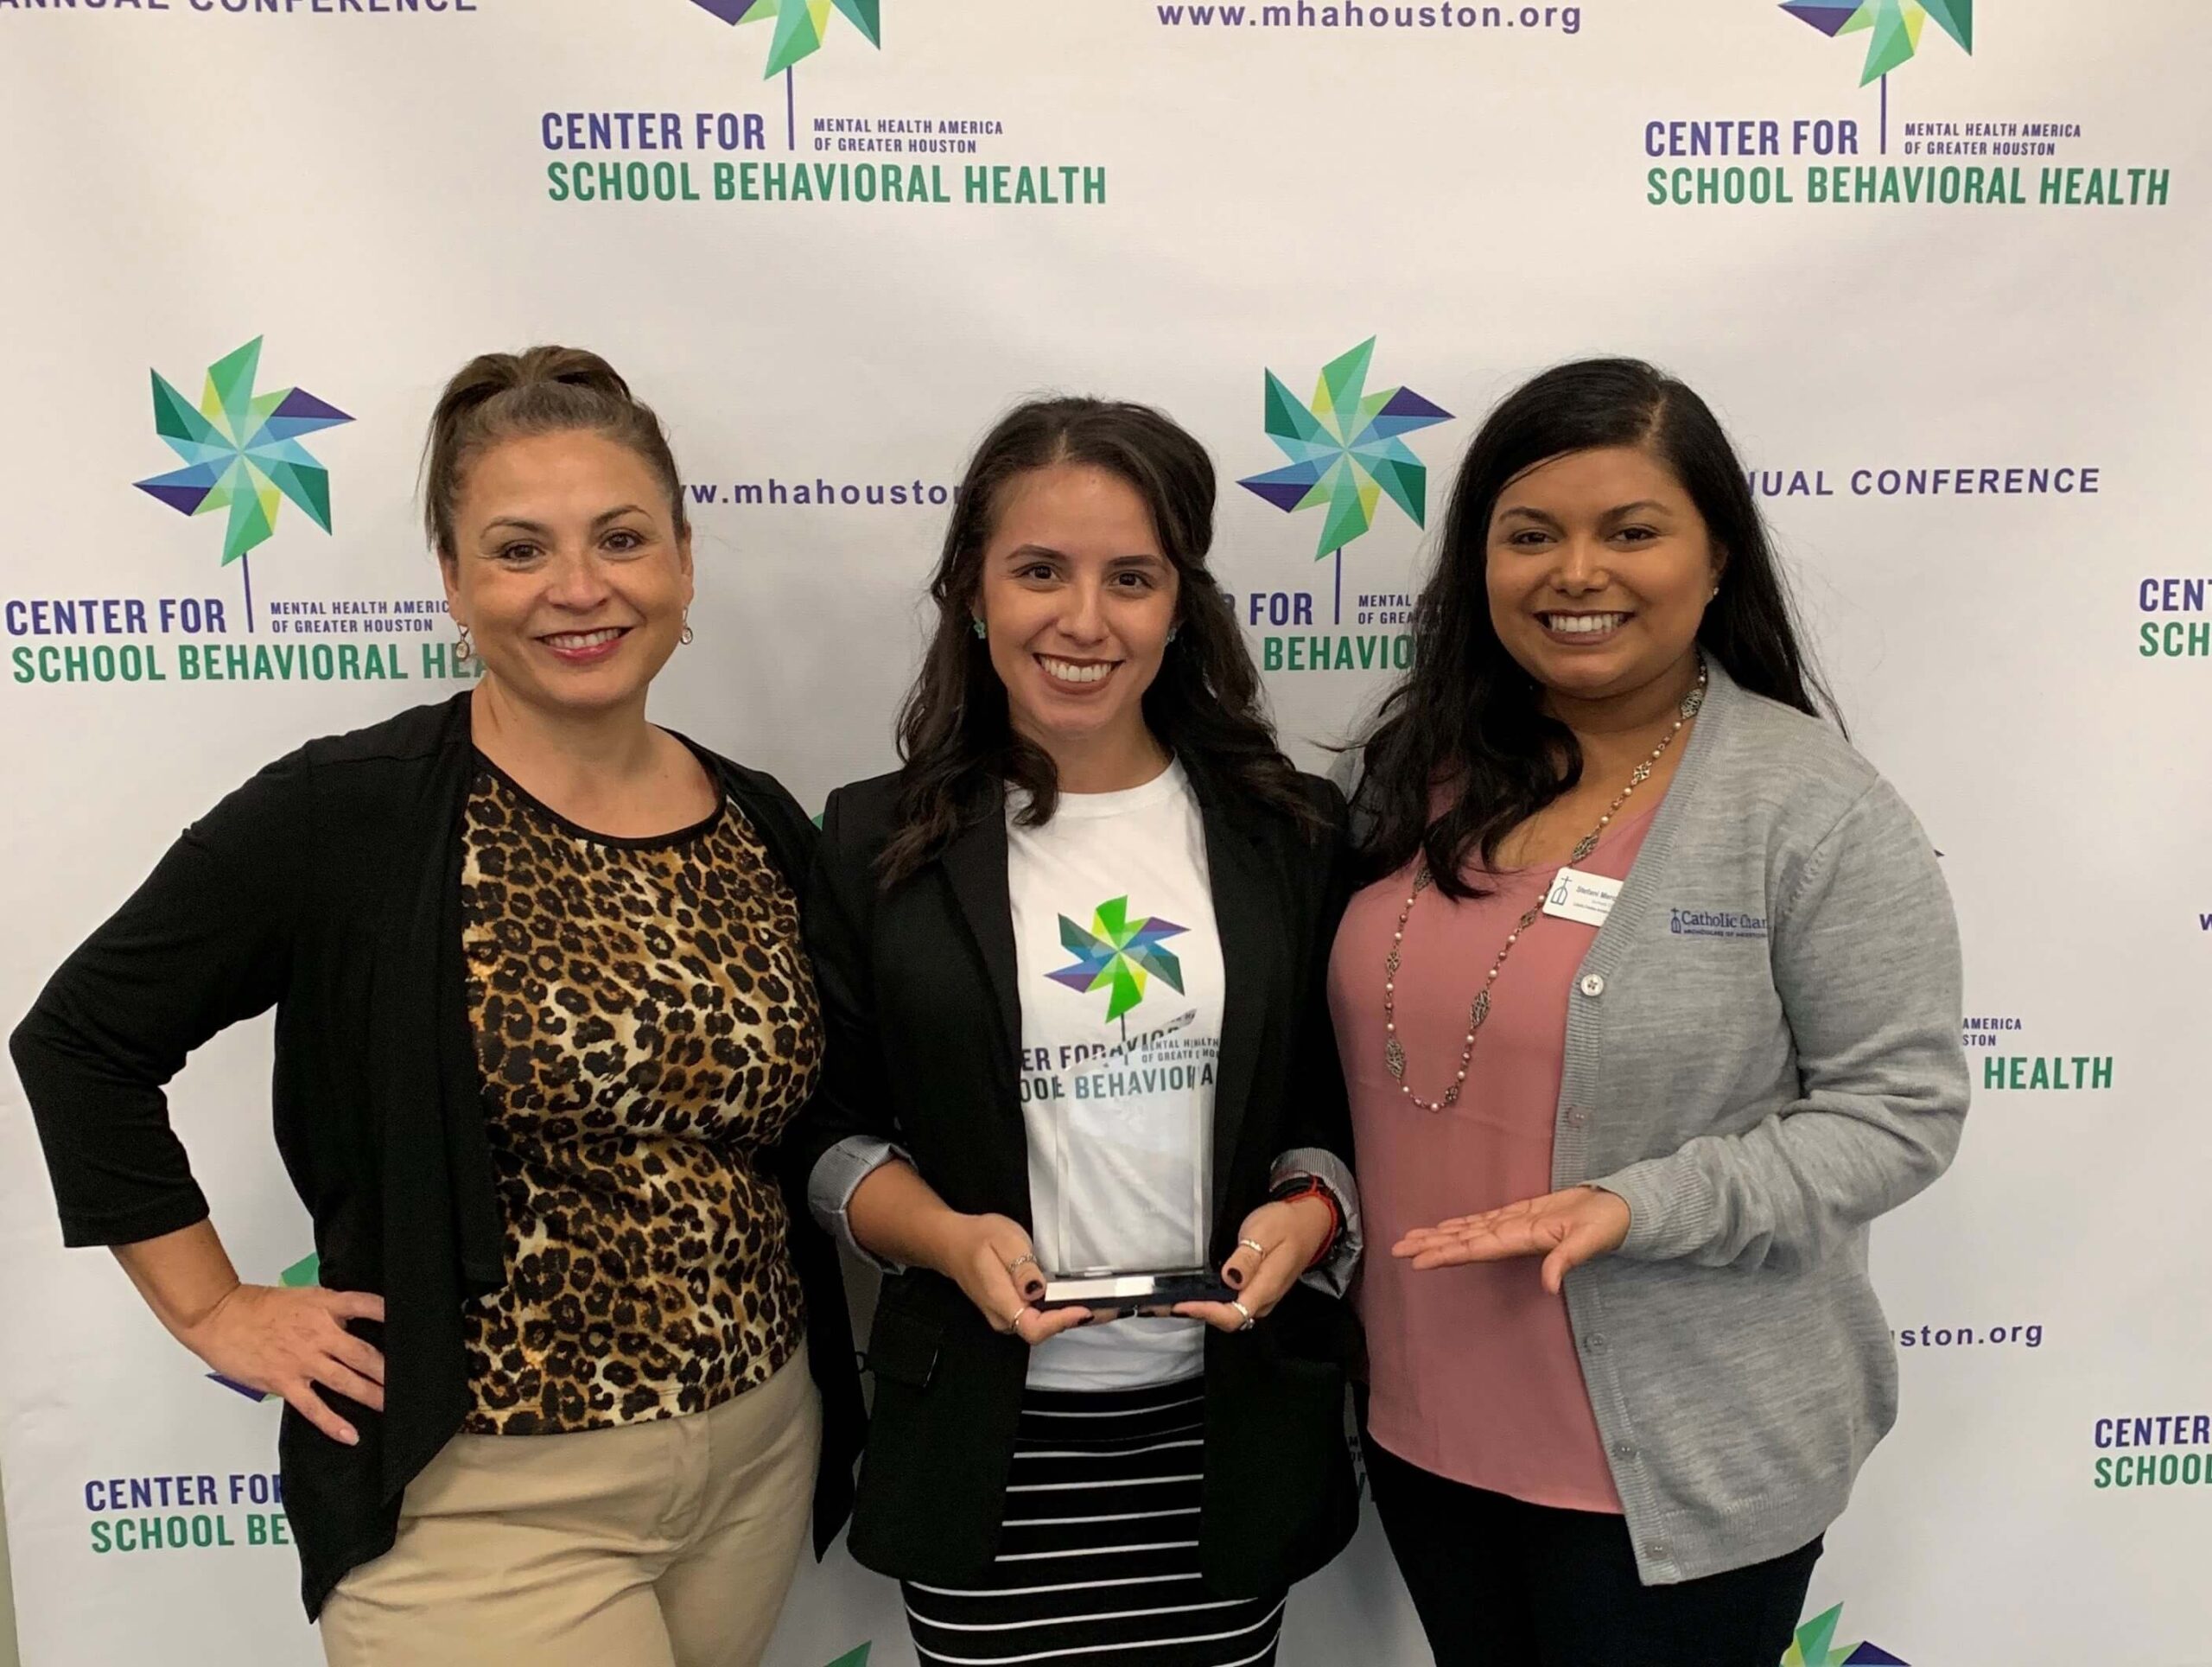 Catholic Charities' School Counseling program won the Bronze Award from Center for School Behavioral Health